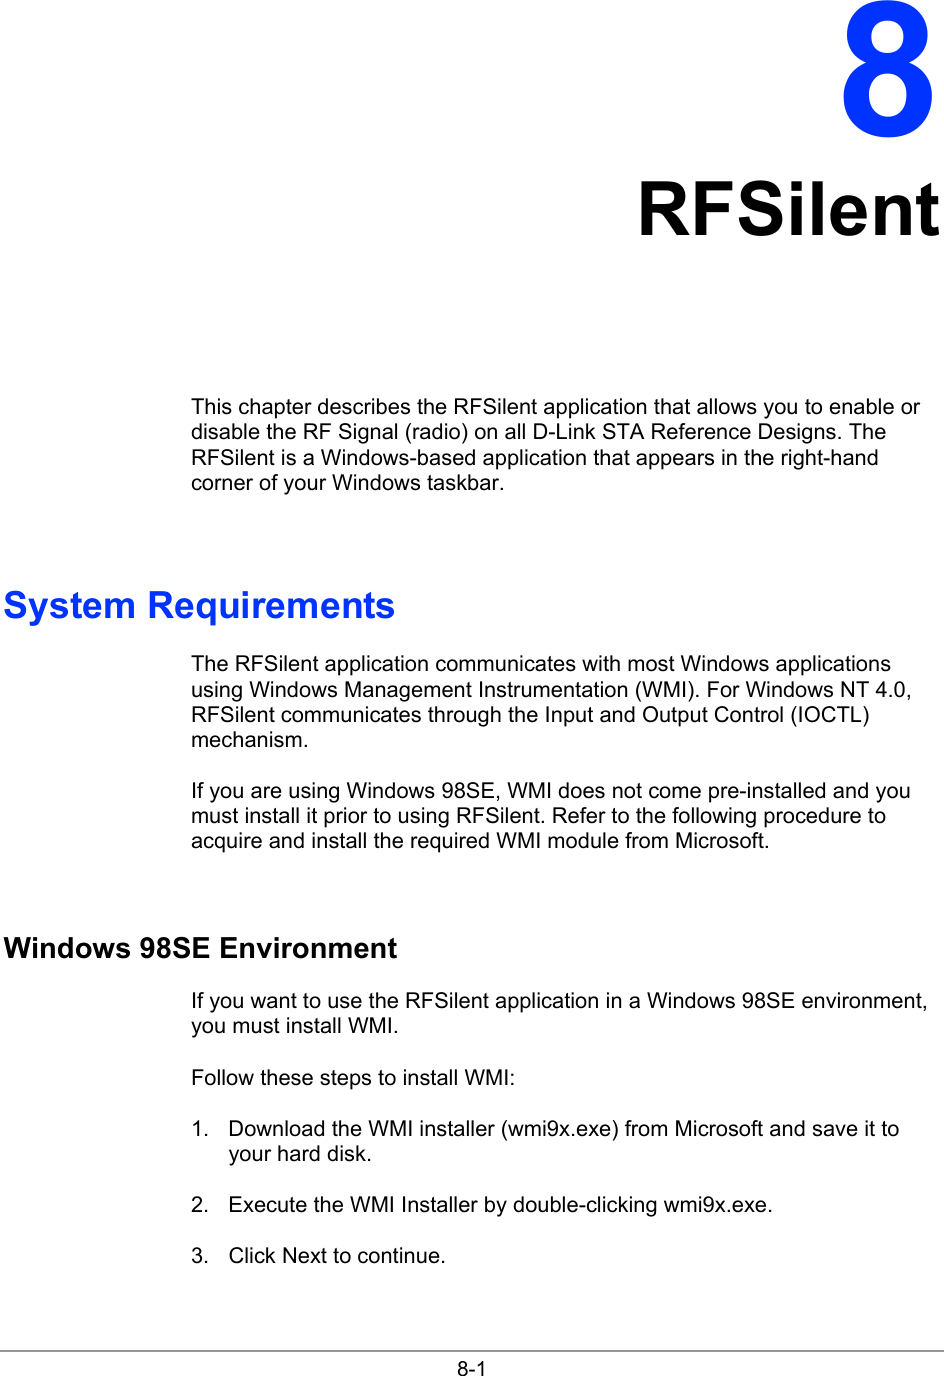  8-1 8 RFSilent This chapter describes the RFSilent application that allows you to enable or disable the RF Signal (radio) on all D-Link STA Reference Designs. The RFSilent is a Windows-based application that appears in the right-hand corner of your Windows taskbar. System Requirements The RFSilent application communicates with most Windows applications using Windows Management Instrumentation (WMI). For Windows NT 4.0, RFSilent communicates through the Input and Output Control (IOCTL) mechanism.  If you are using Windows 98SE, WMI does not come pre-installed and you must install it prior to using RFSilent. Refer to the following procedure to acquire and install the required WMI module from Microsoft. Windows 98SE Environment If you want to use the RFSilent application in a Windows 98SE environment, you must install WMI. Follow these steps to install WMI: 1.  Download the WMI installer (wmi9x.exe) from Microsoft and save it to your hard disk. 2.  Execute the WMI Installer by double-clicking wmi9x.exe. 3.  Click Next to continue. 